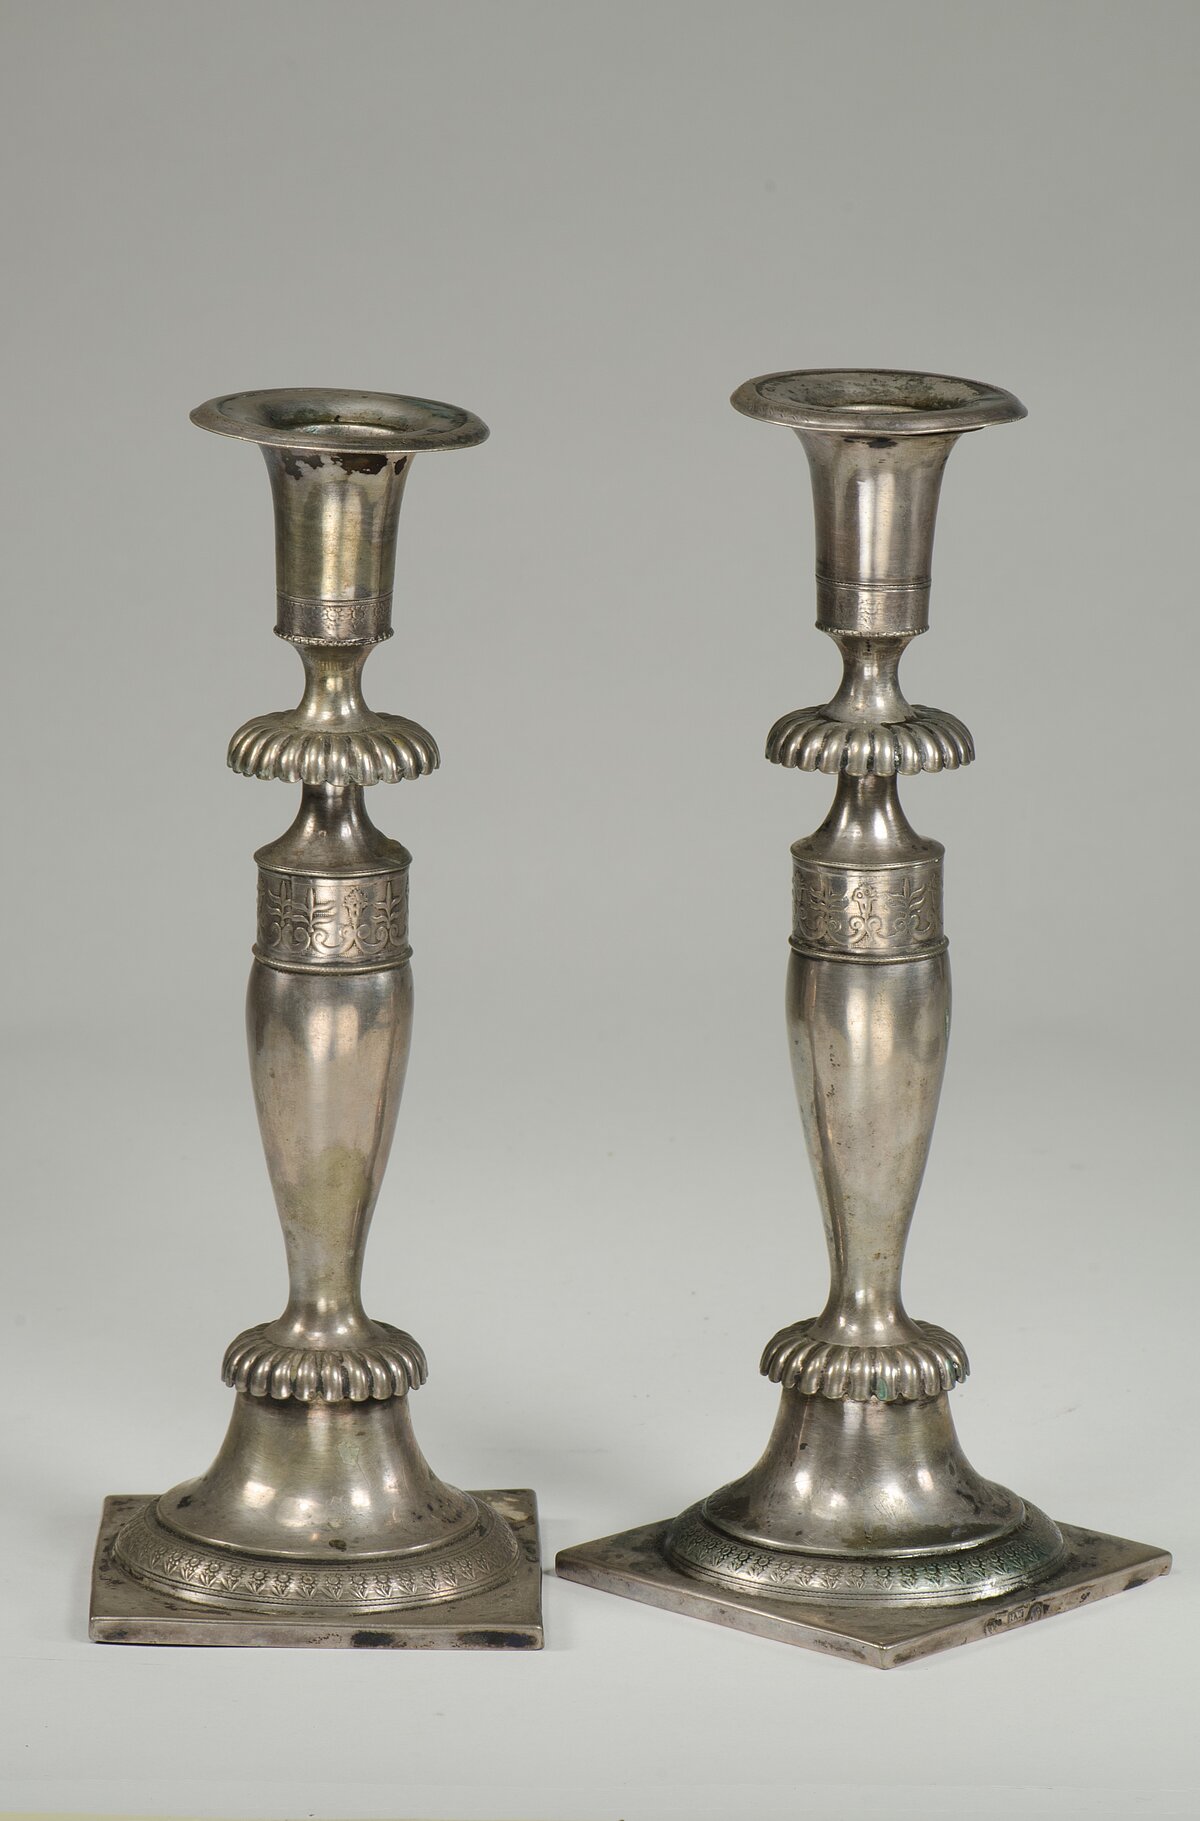 Two elaborately worked but simple silver candlesticks standing side by side, donated to the Jewish Museum Munich by the heirs of Olga Maier. 